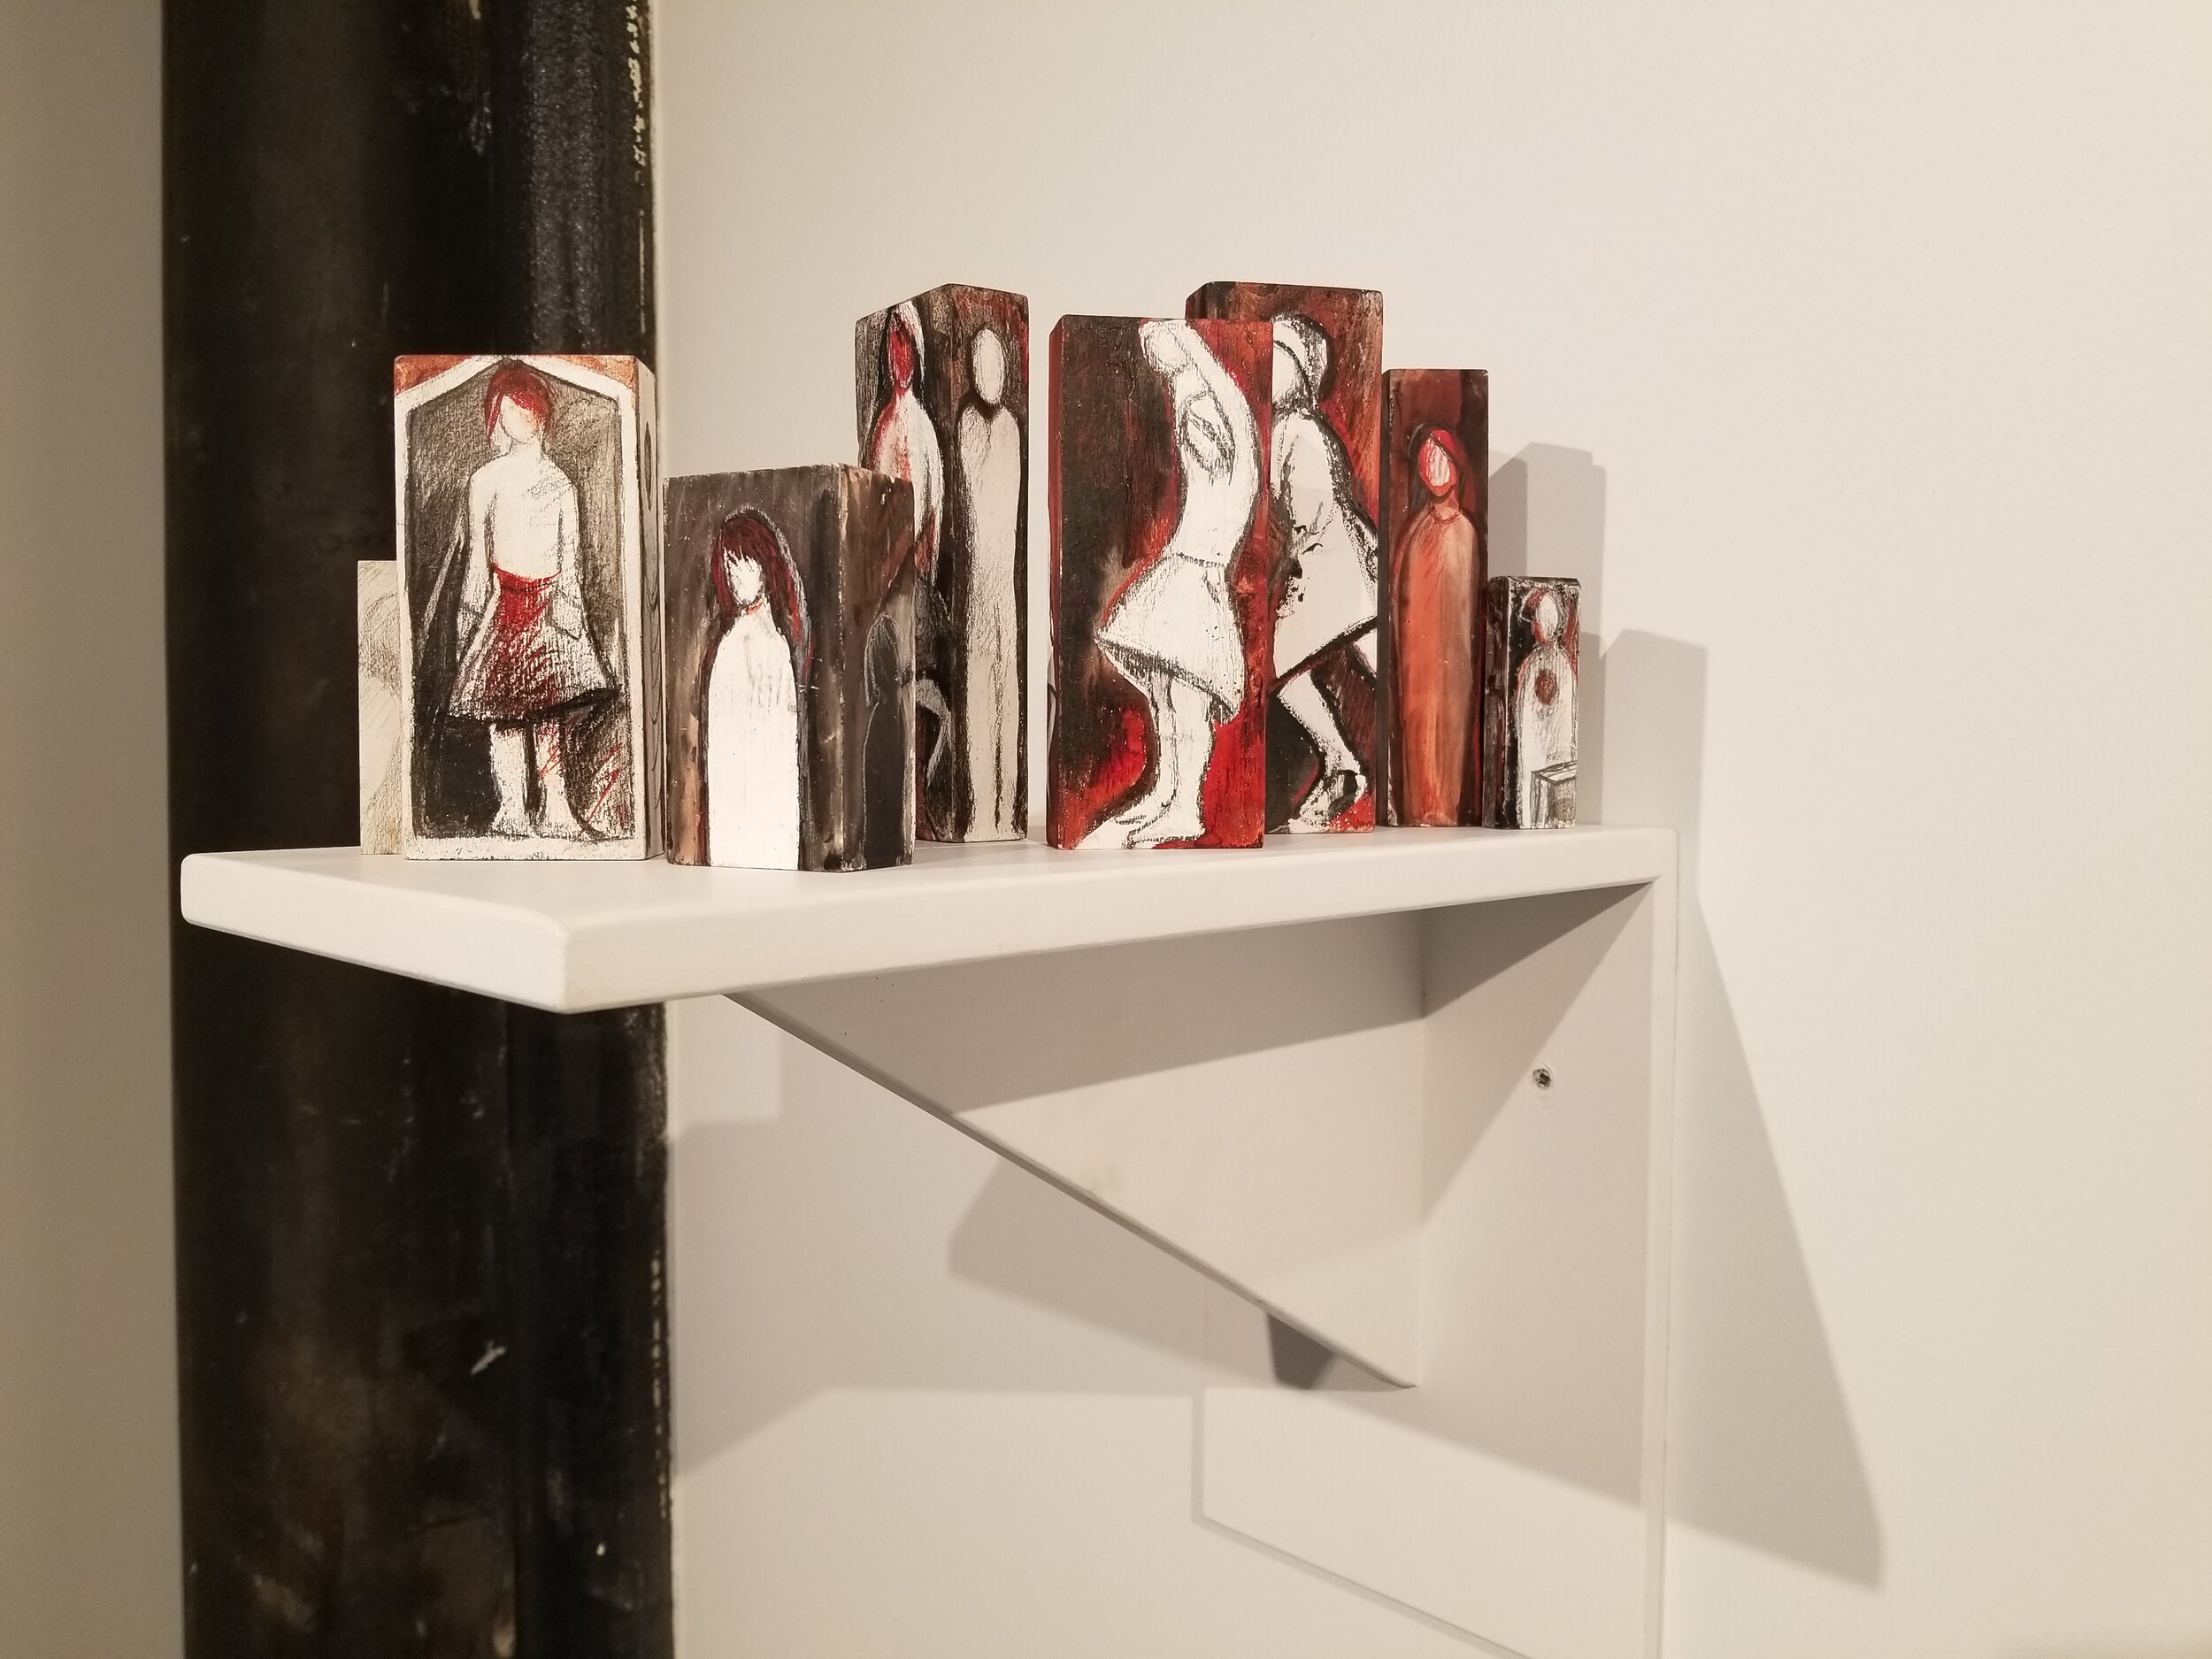 "Playing", installation view